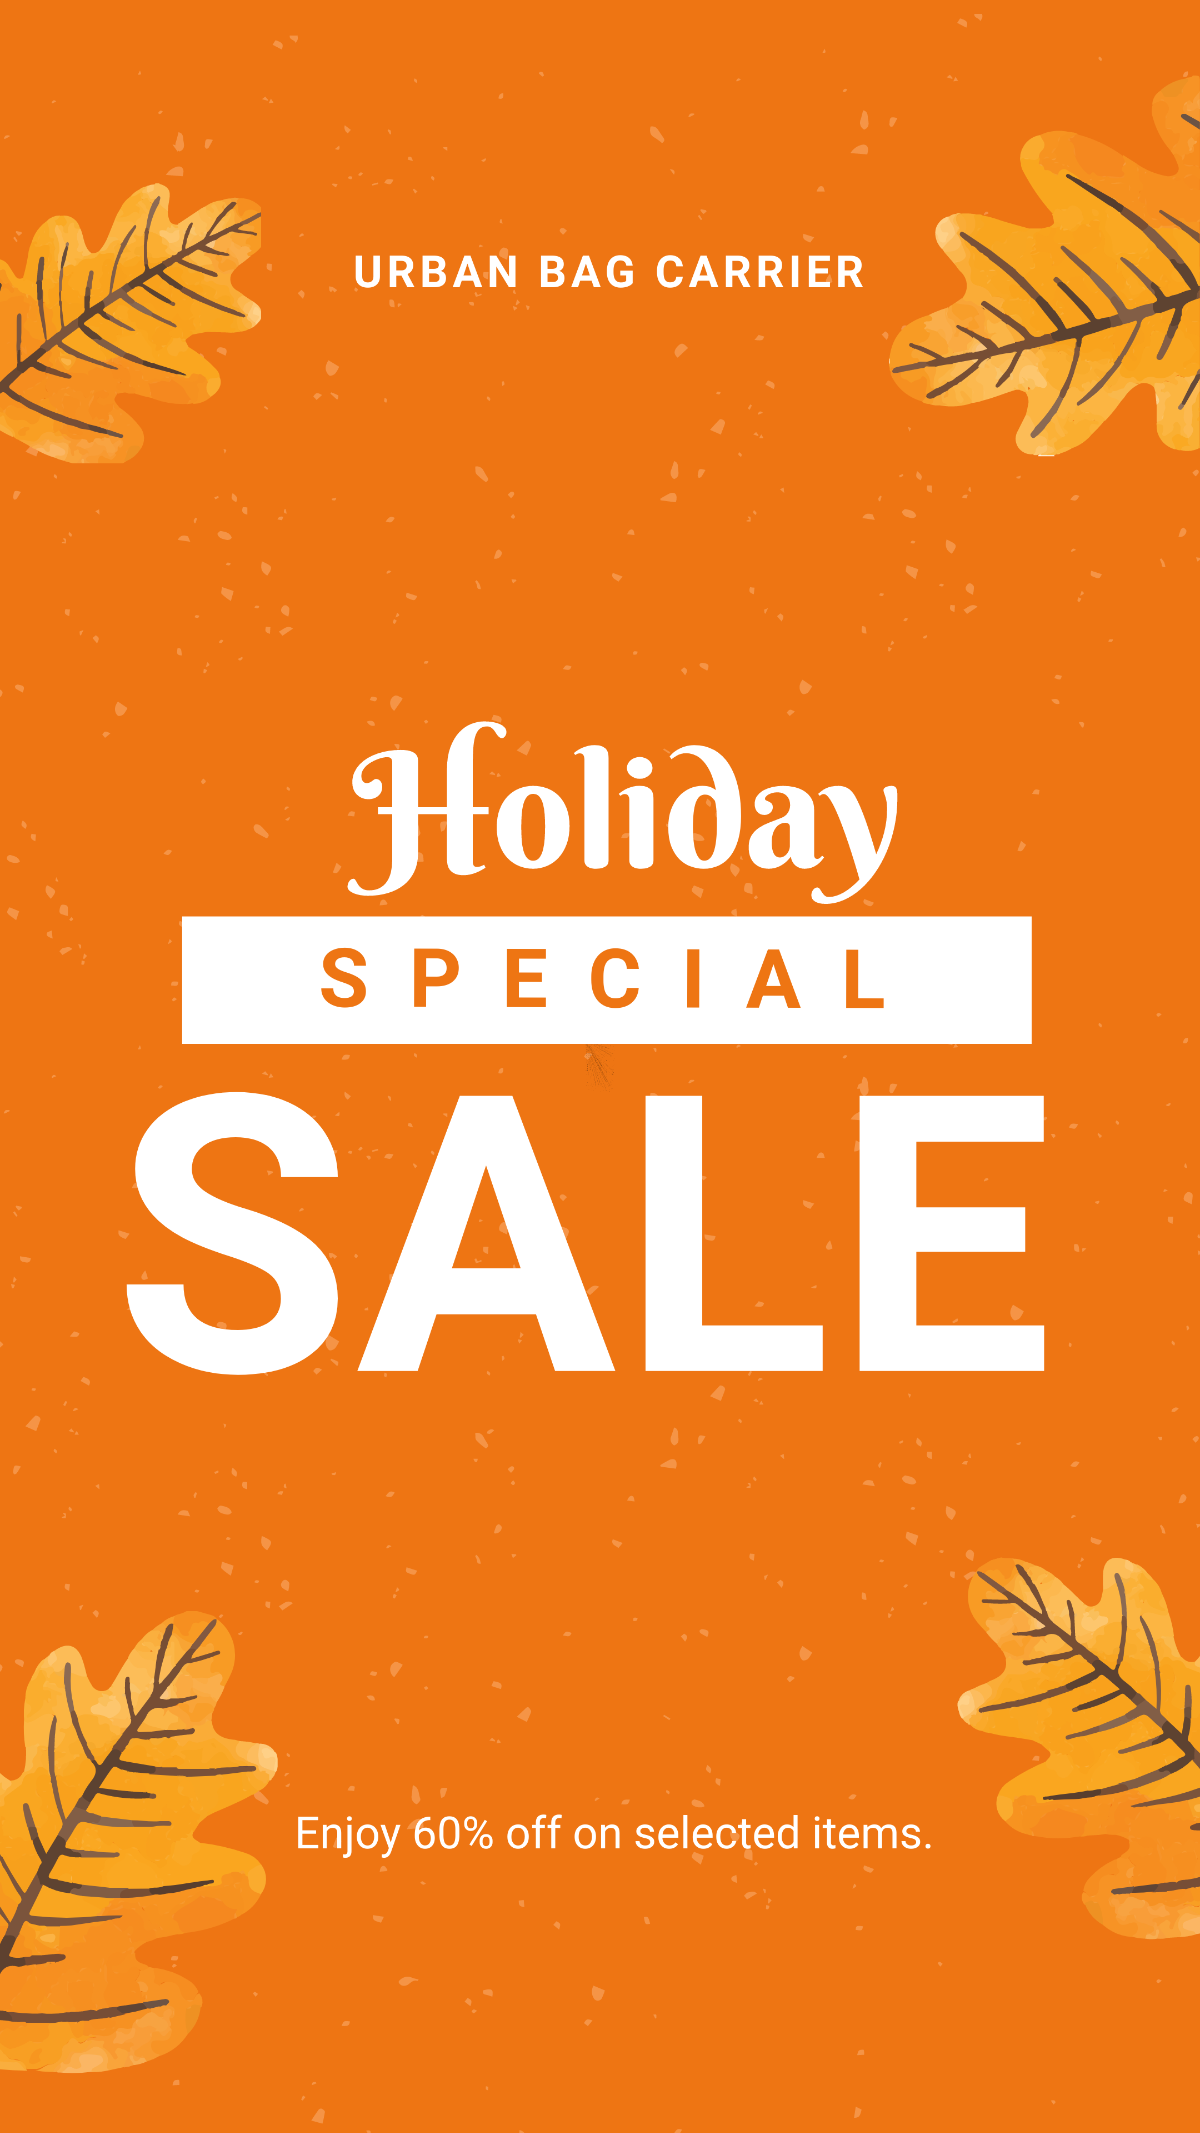 Holiday Special Sale Whatsapp Image Template